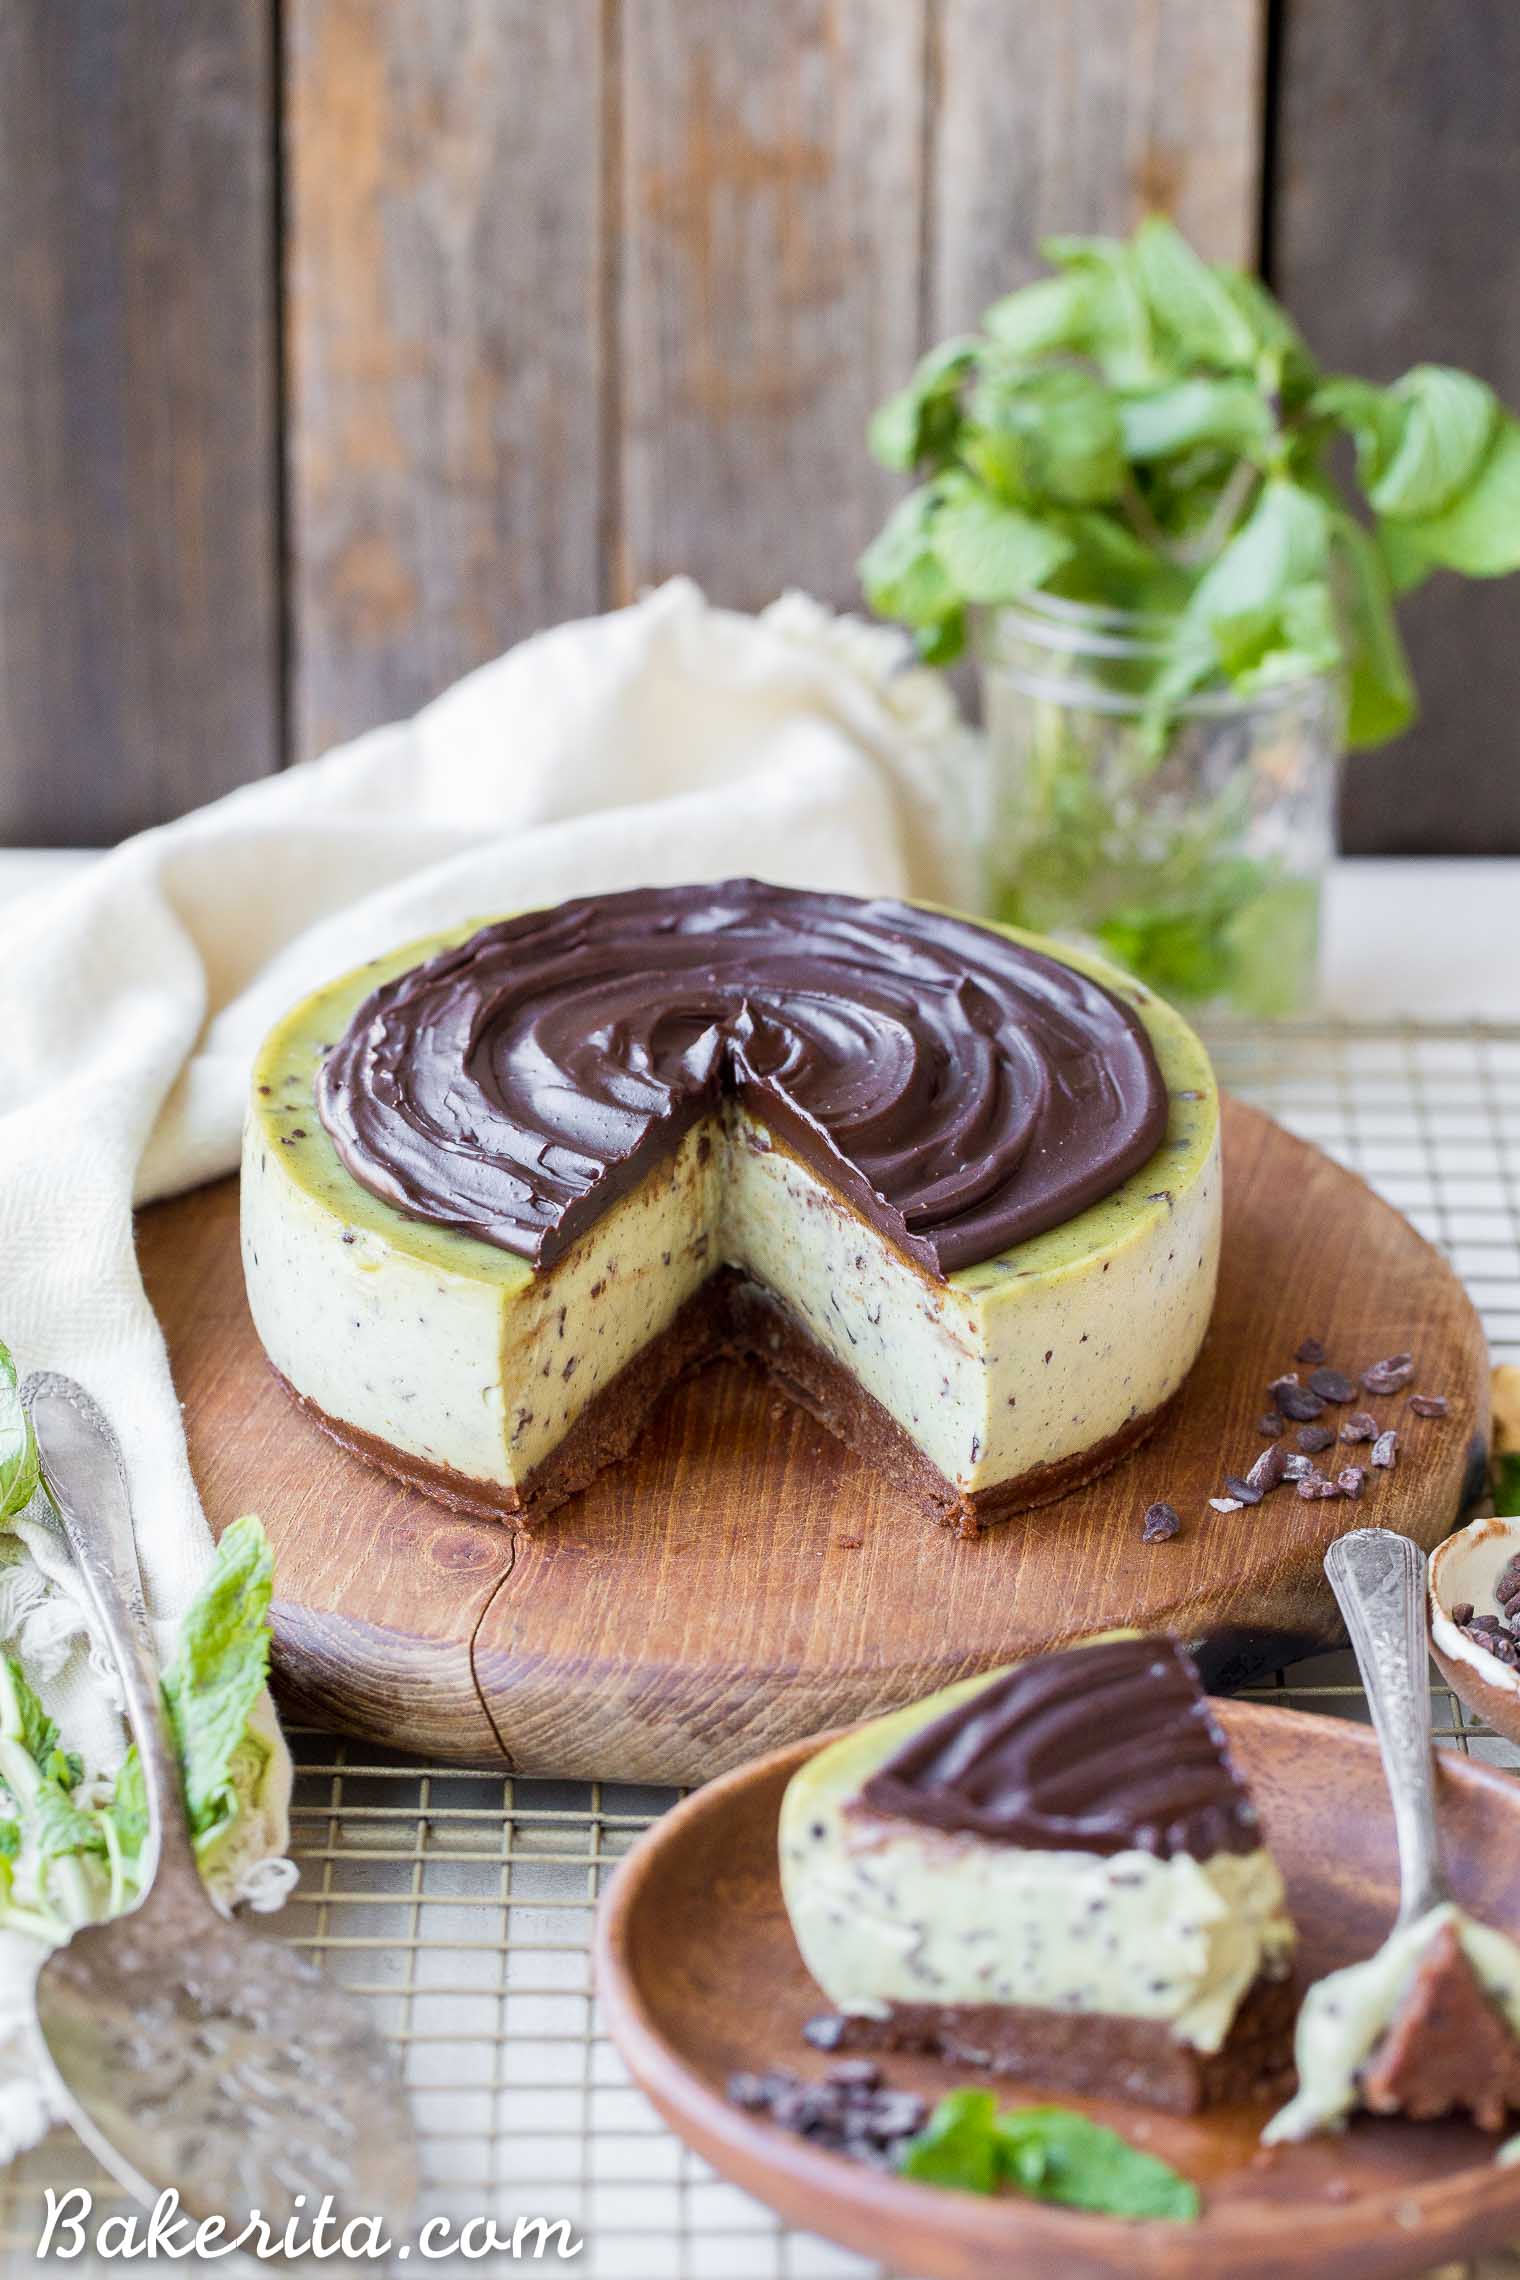 This No Bake Mint Chip Cheesecake is a healthier paleo and vegan cheesecake, made with a creamy cashew base. It has a nutty chocolate crust and a smooth and minty filling, with crunchy cacao nibs throughout and creamy dark chocolate ganache on top.